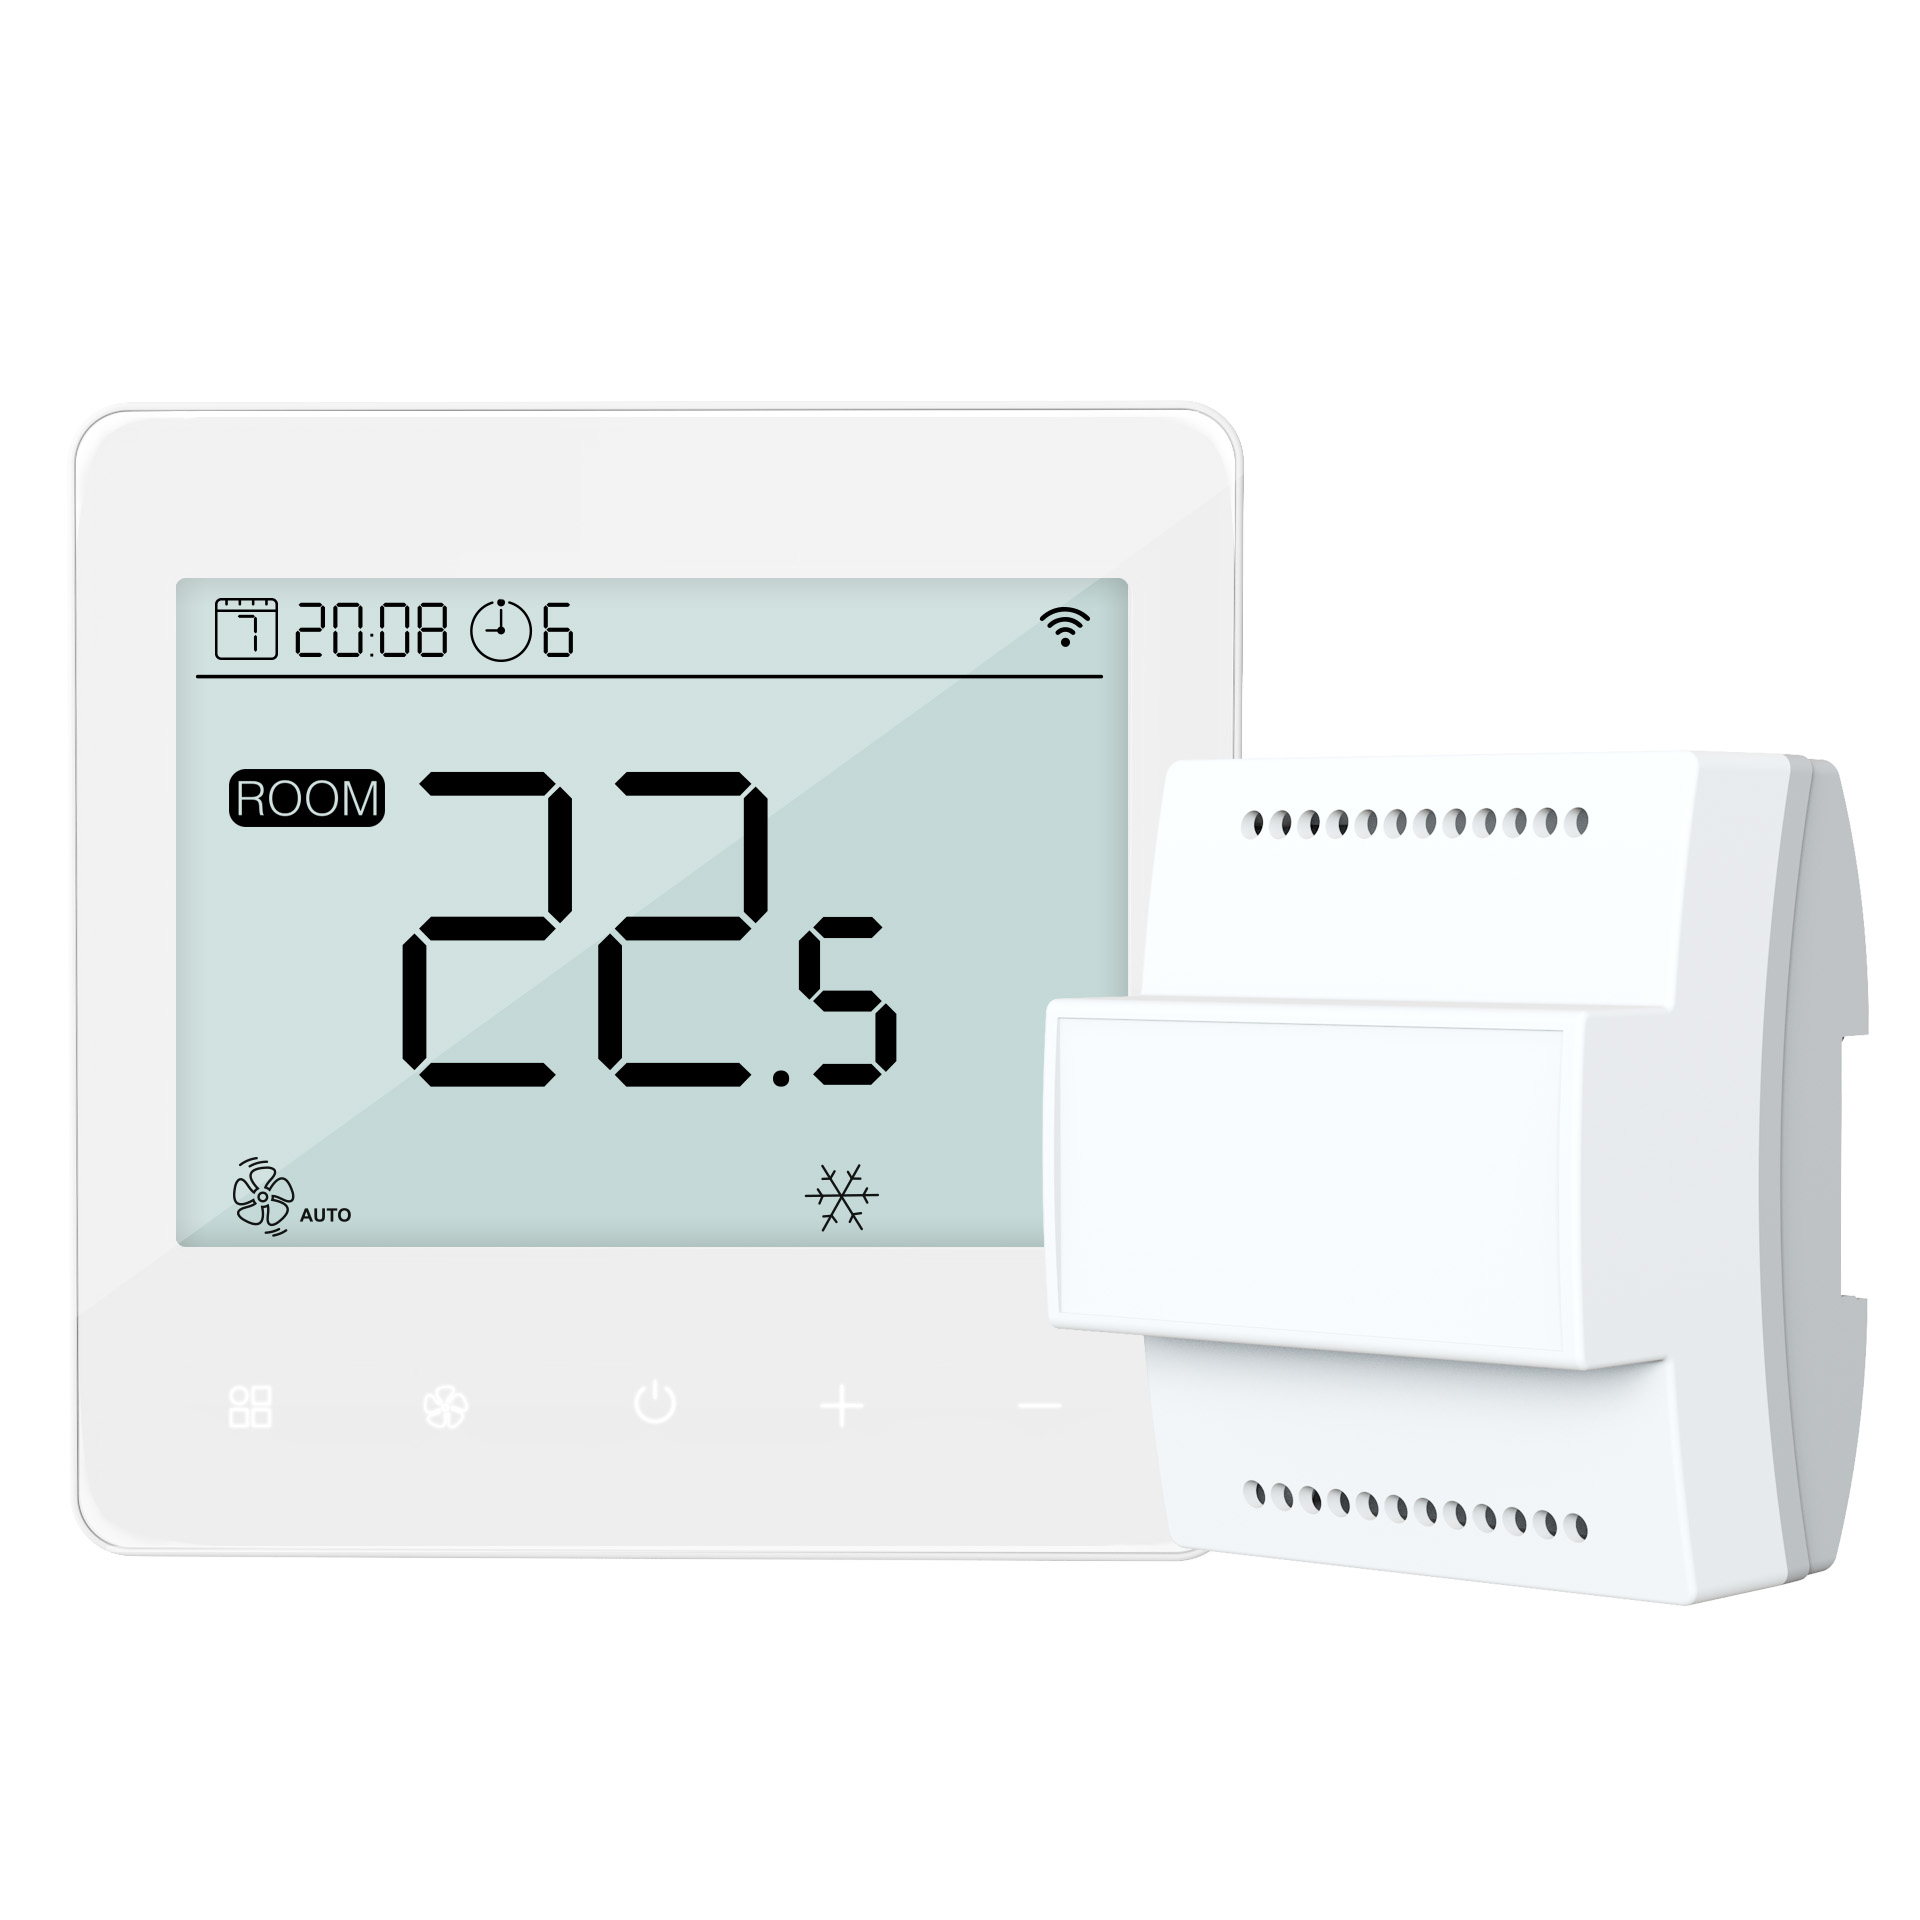 Touch fan coil Thermostat With Modbus, Keycard, External Sensor,Child Lock